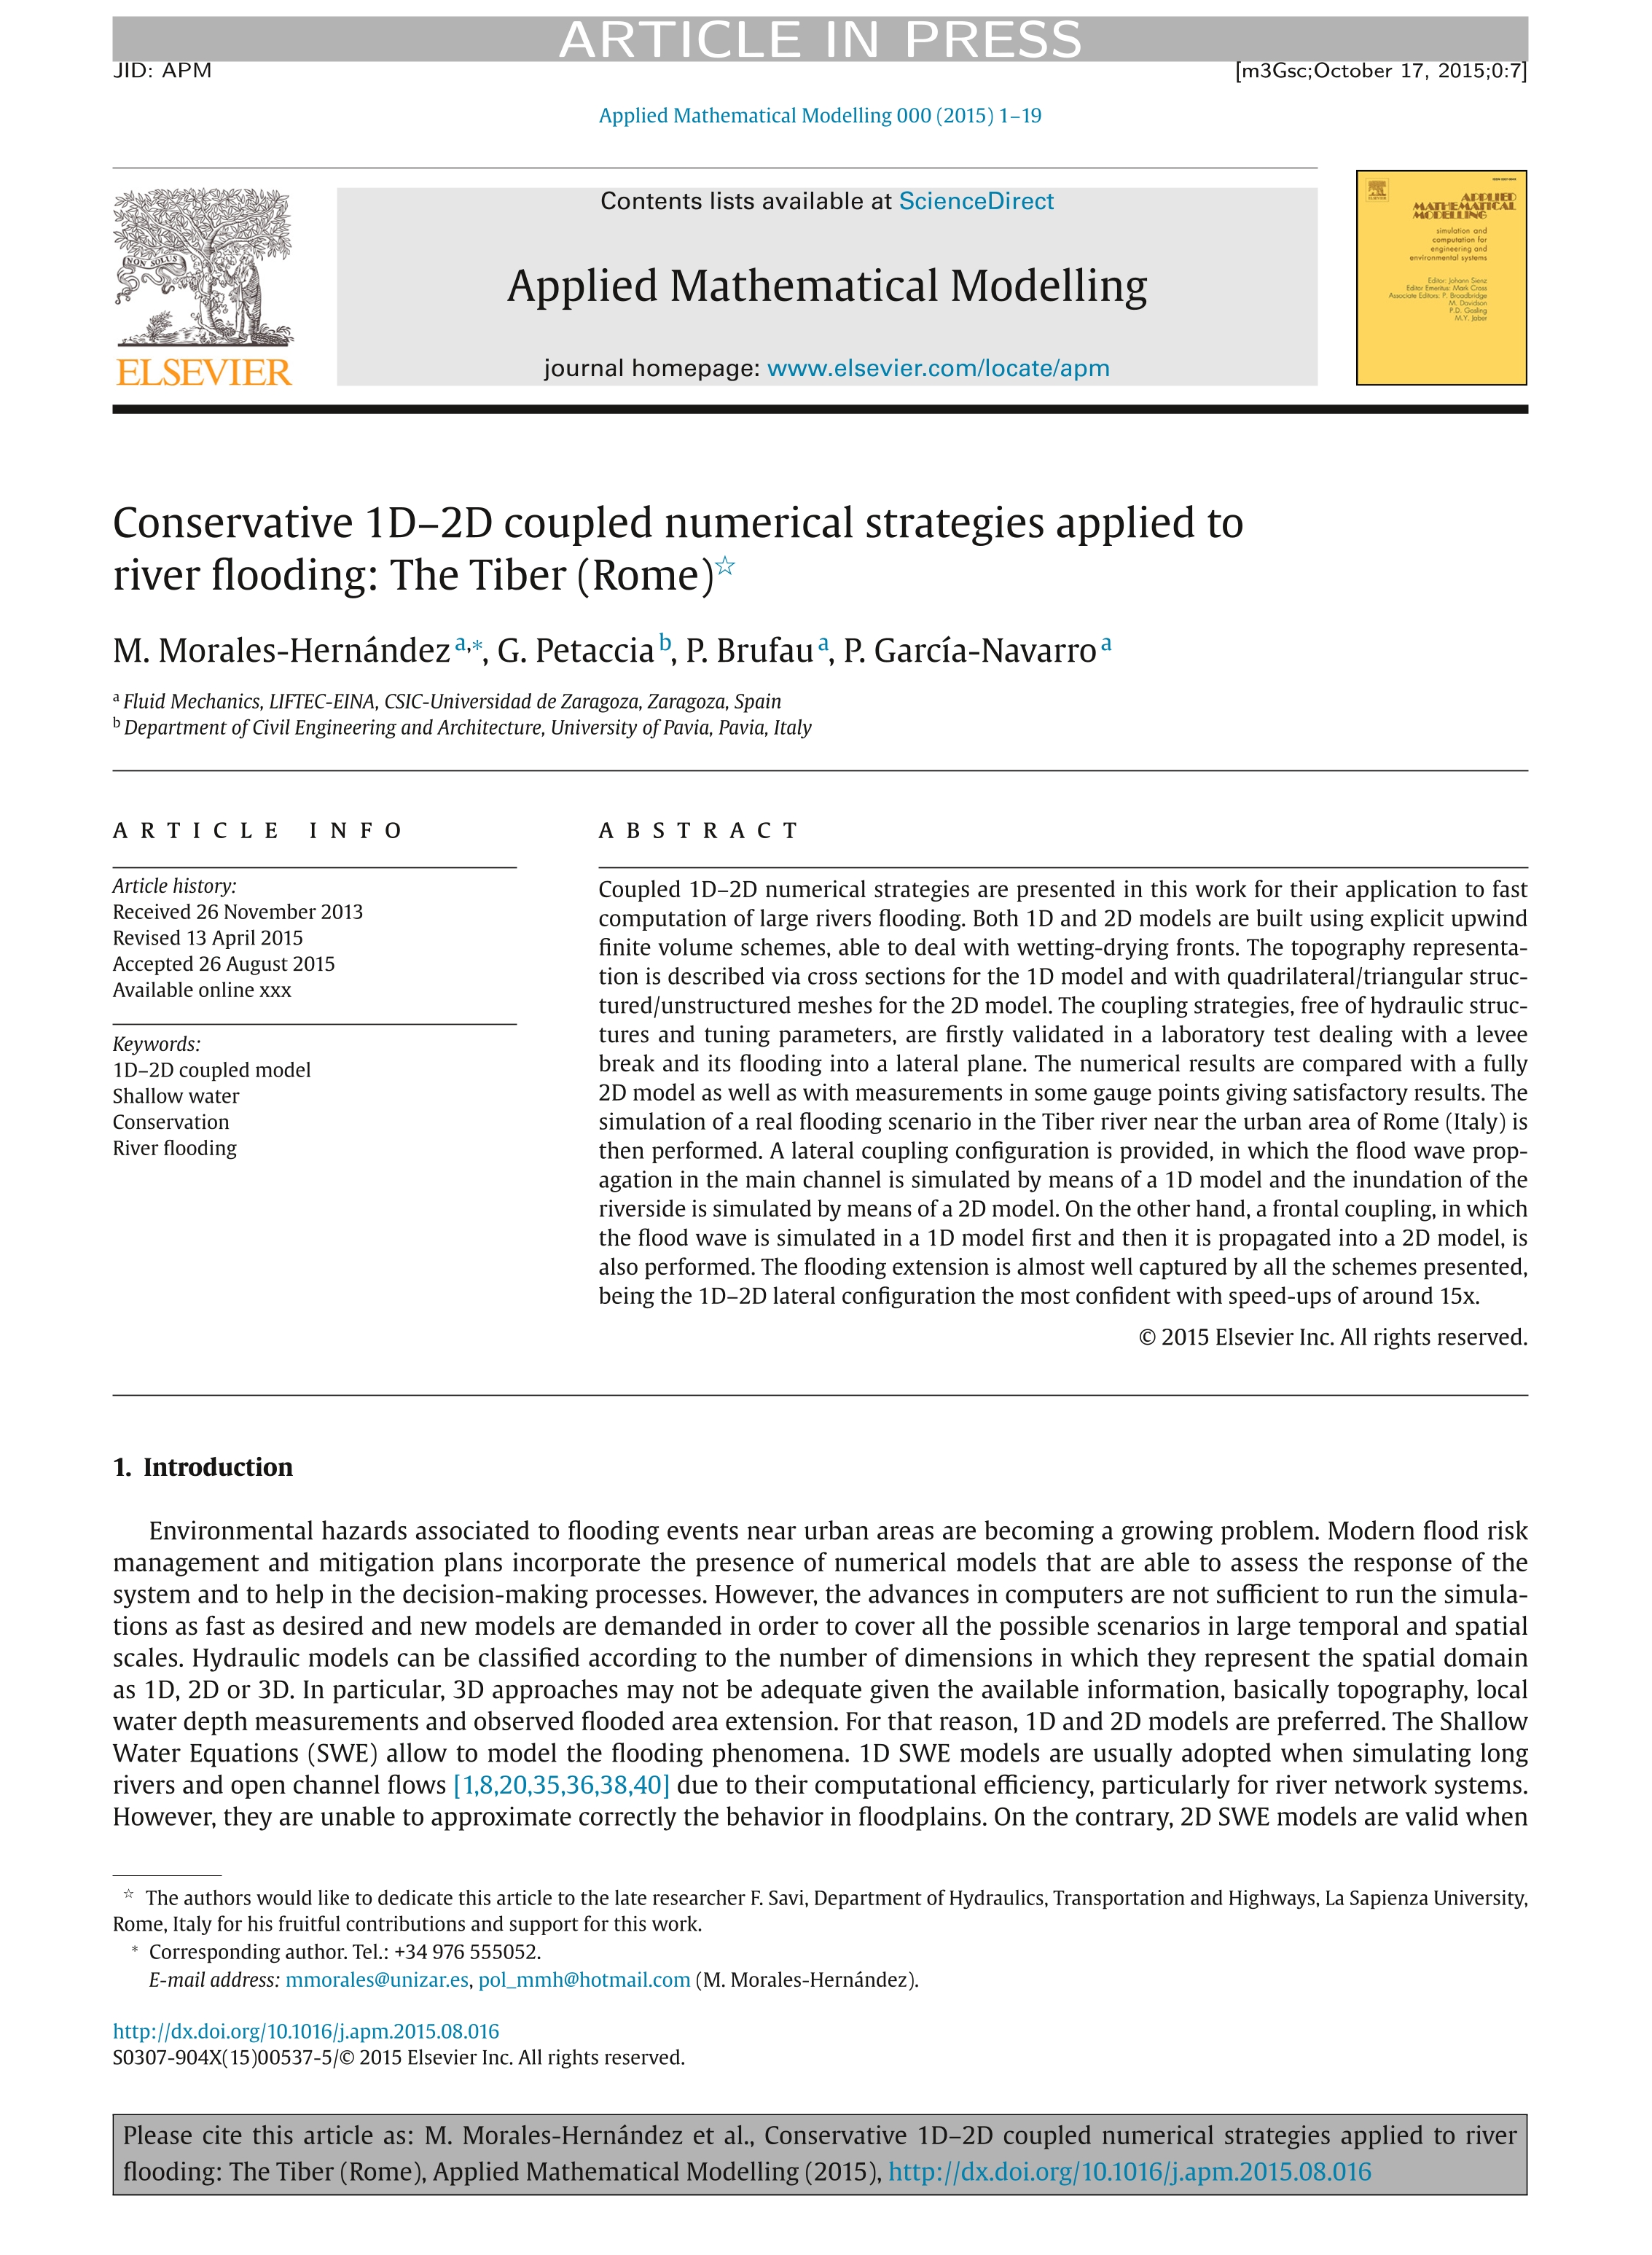 Conservative 1D-2D coupled numerical strategies applied to river flooding: The Tiber (Rome)